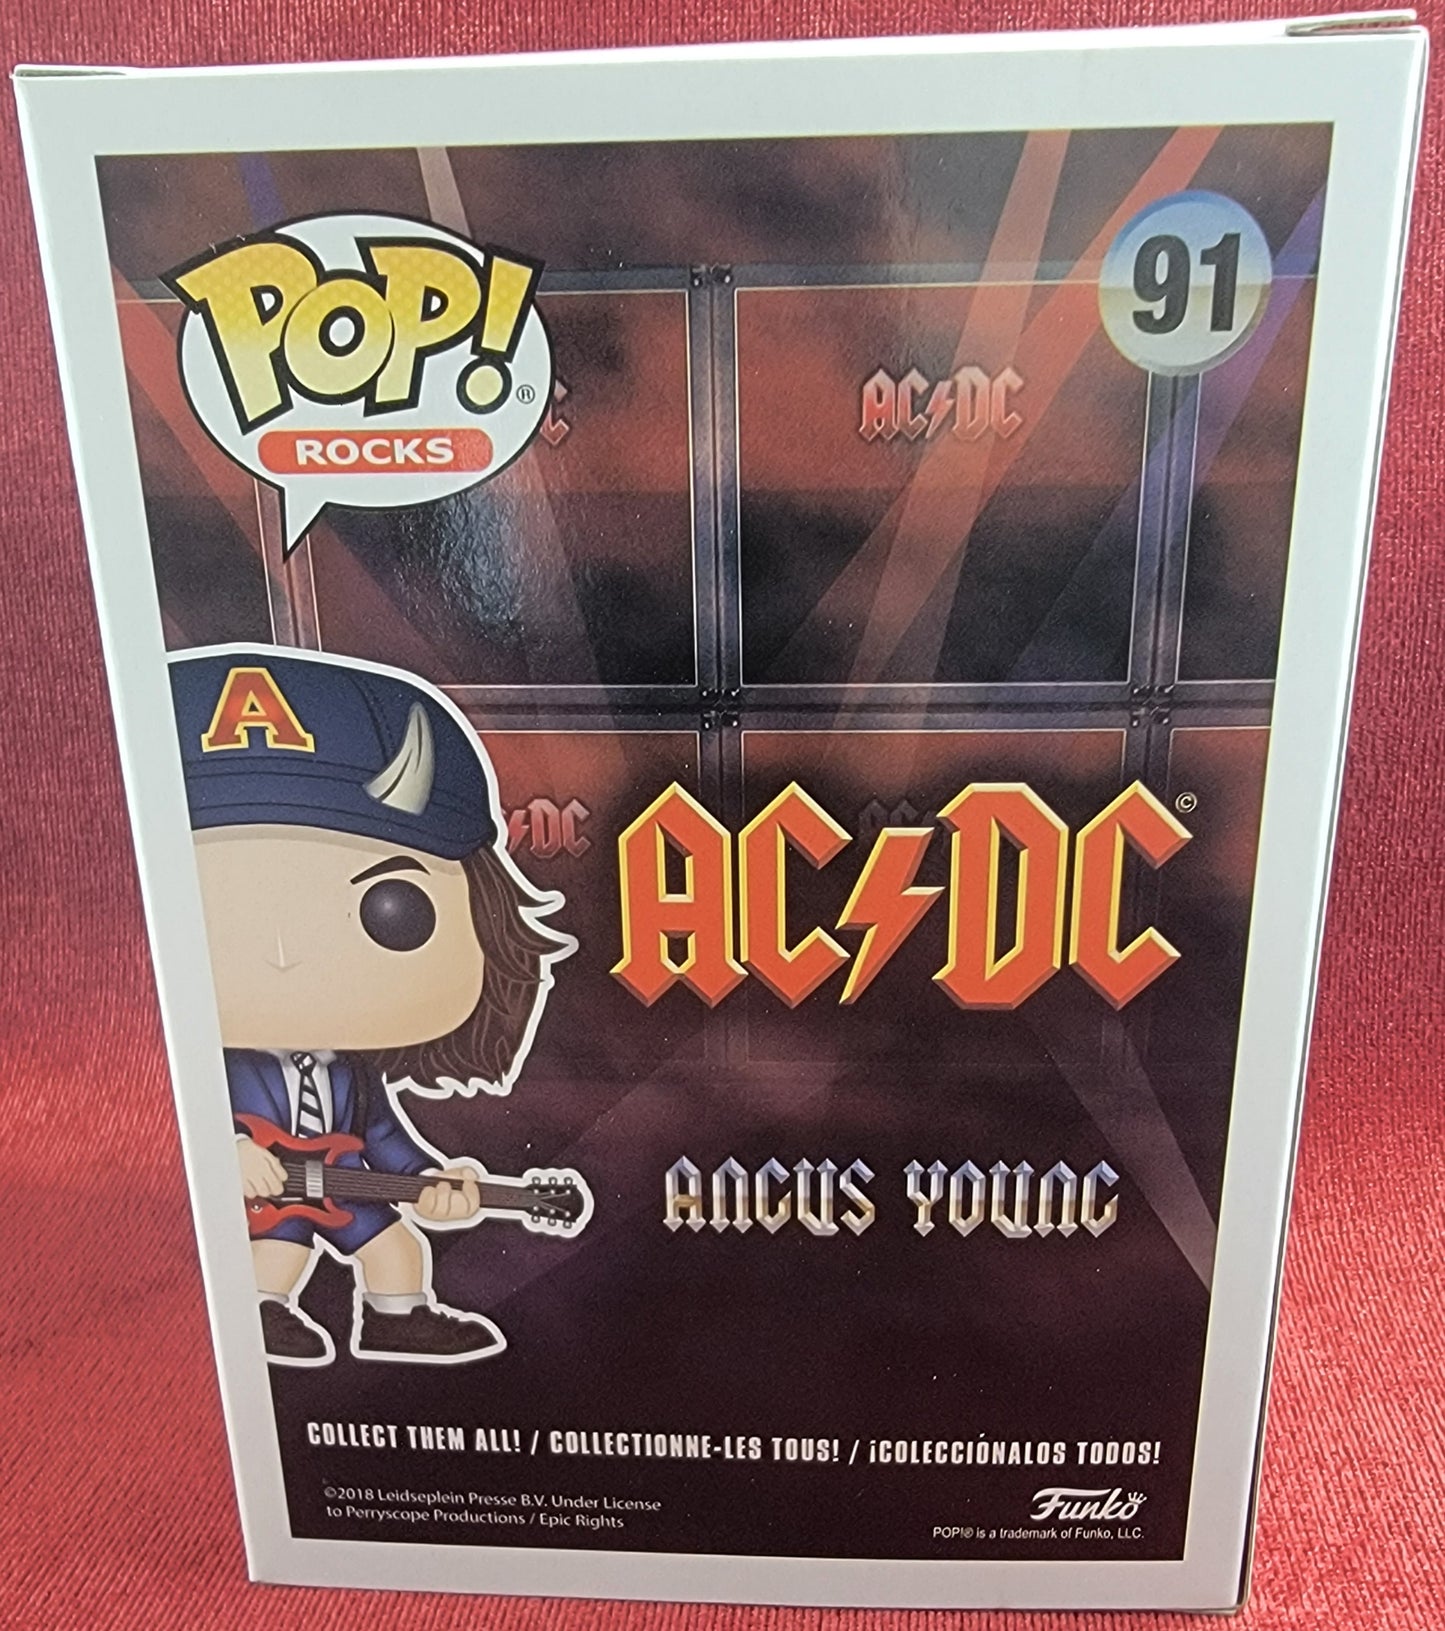 Angus Young Chase funko # 91 (nib)
With pop protector